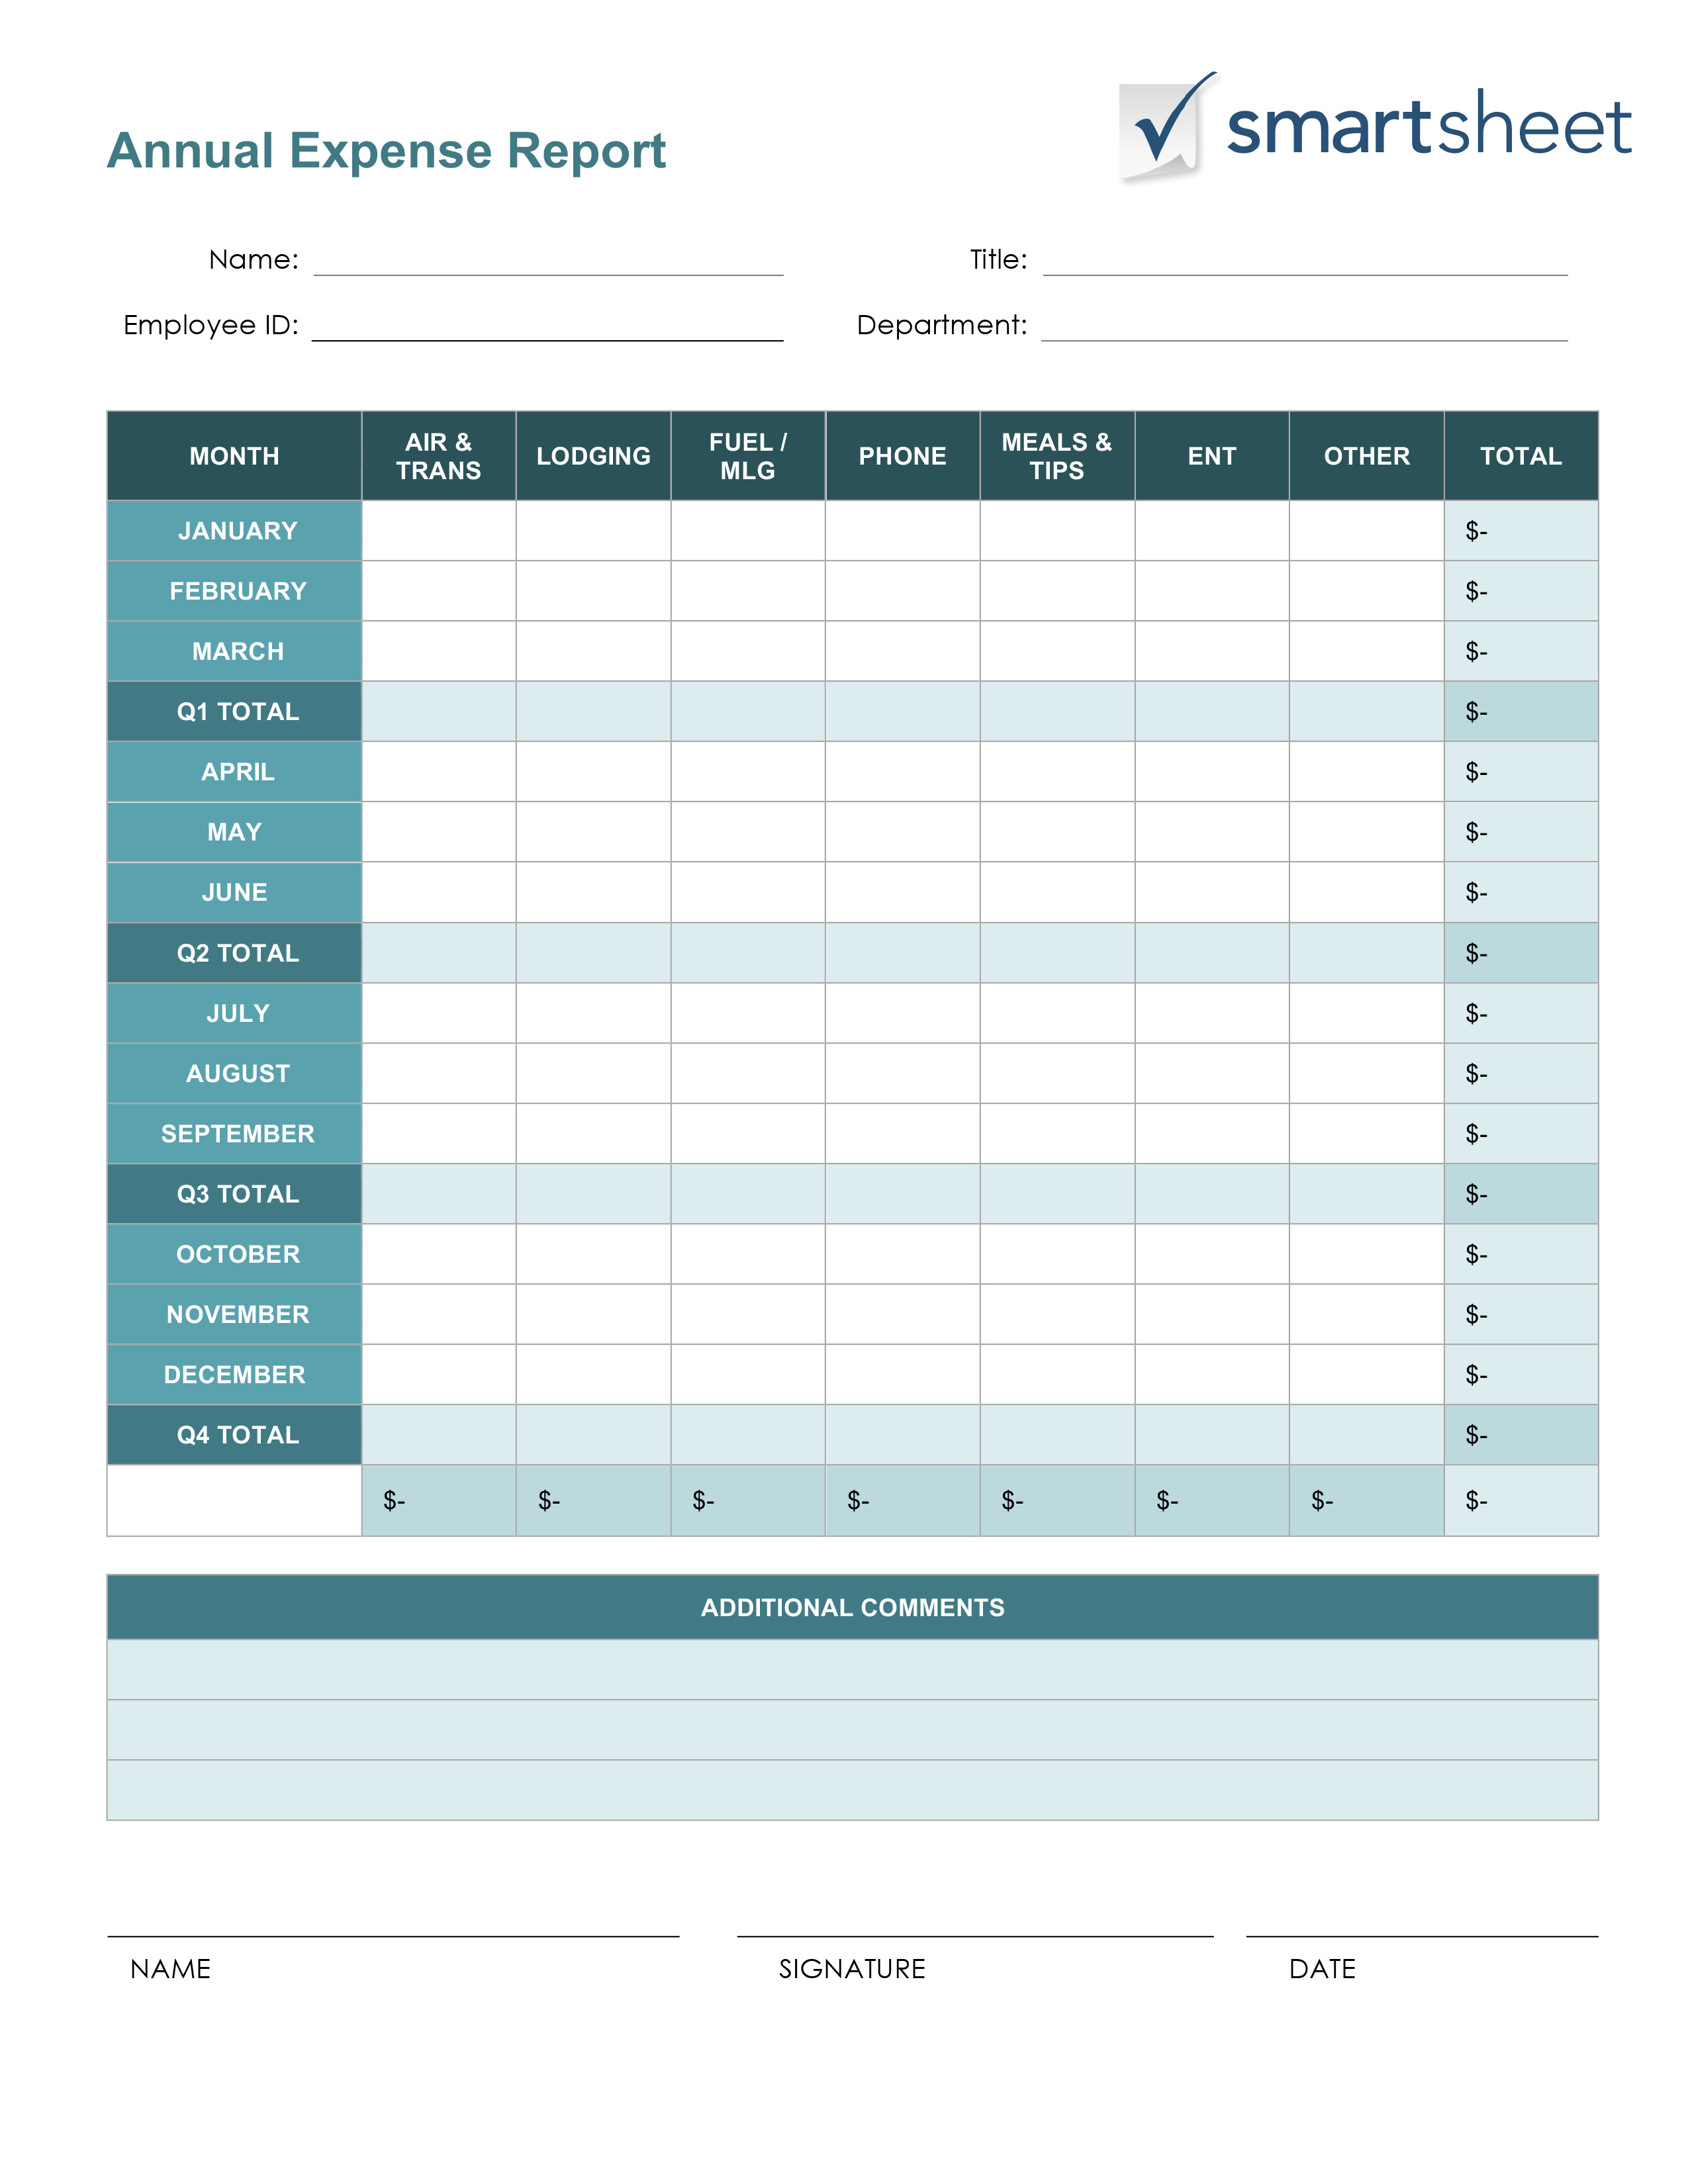 Free Expense Report Templates Smartsheet For Yearly Expense Report Template